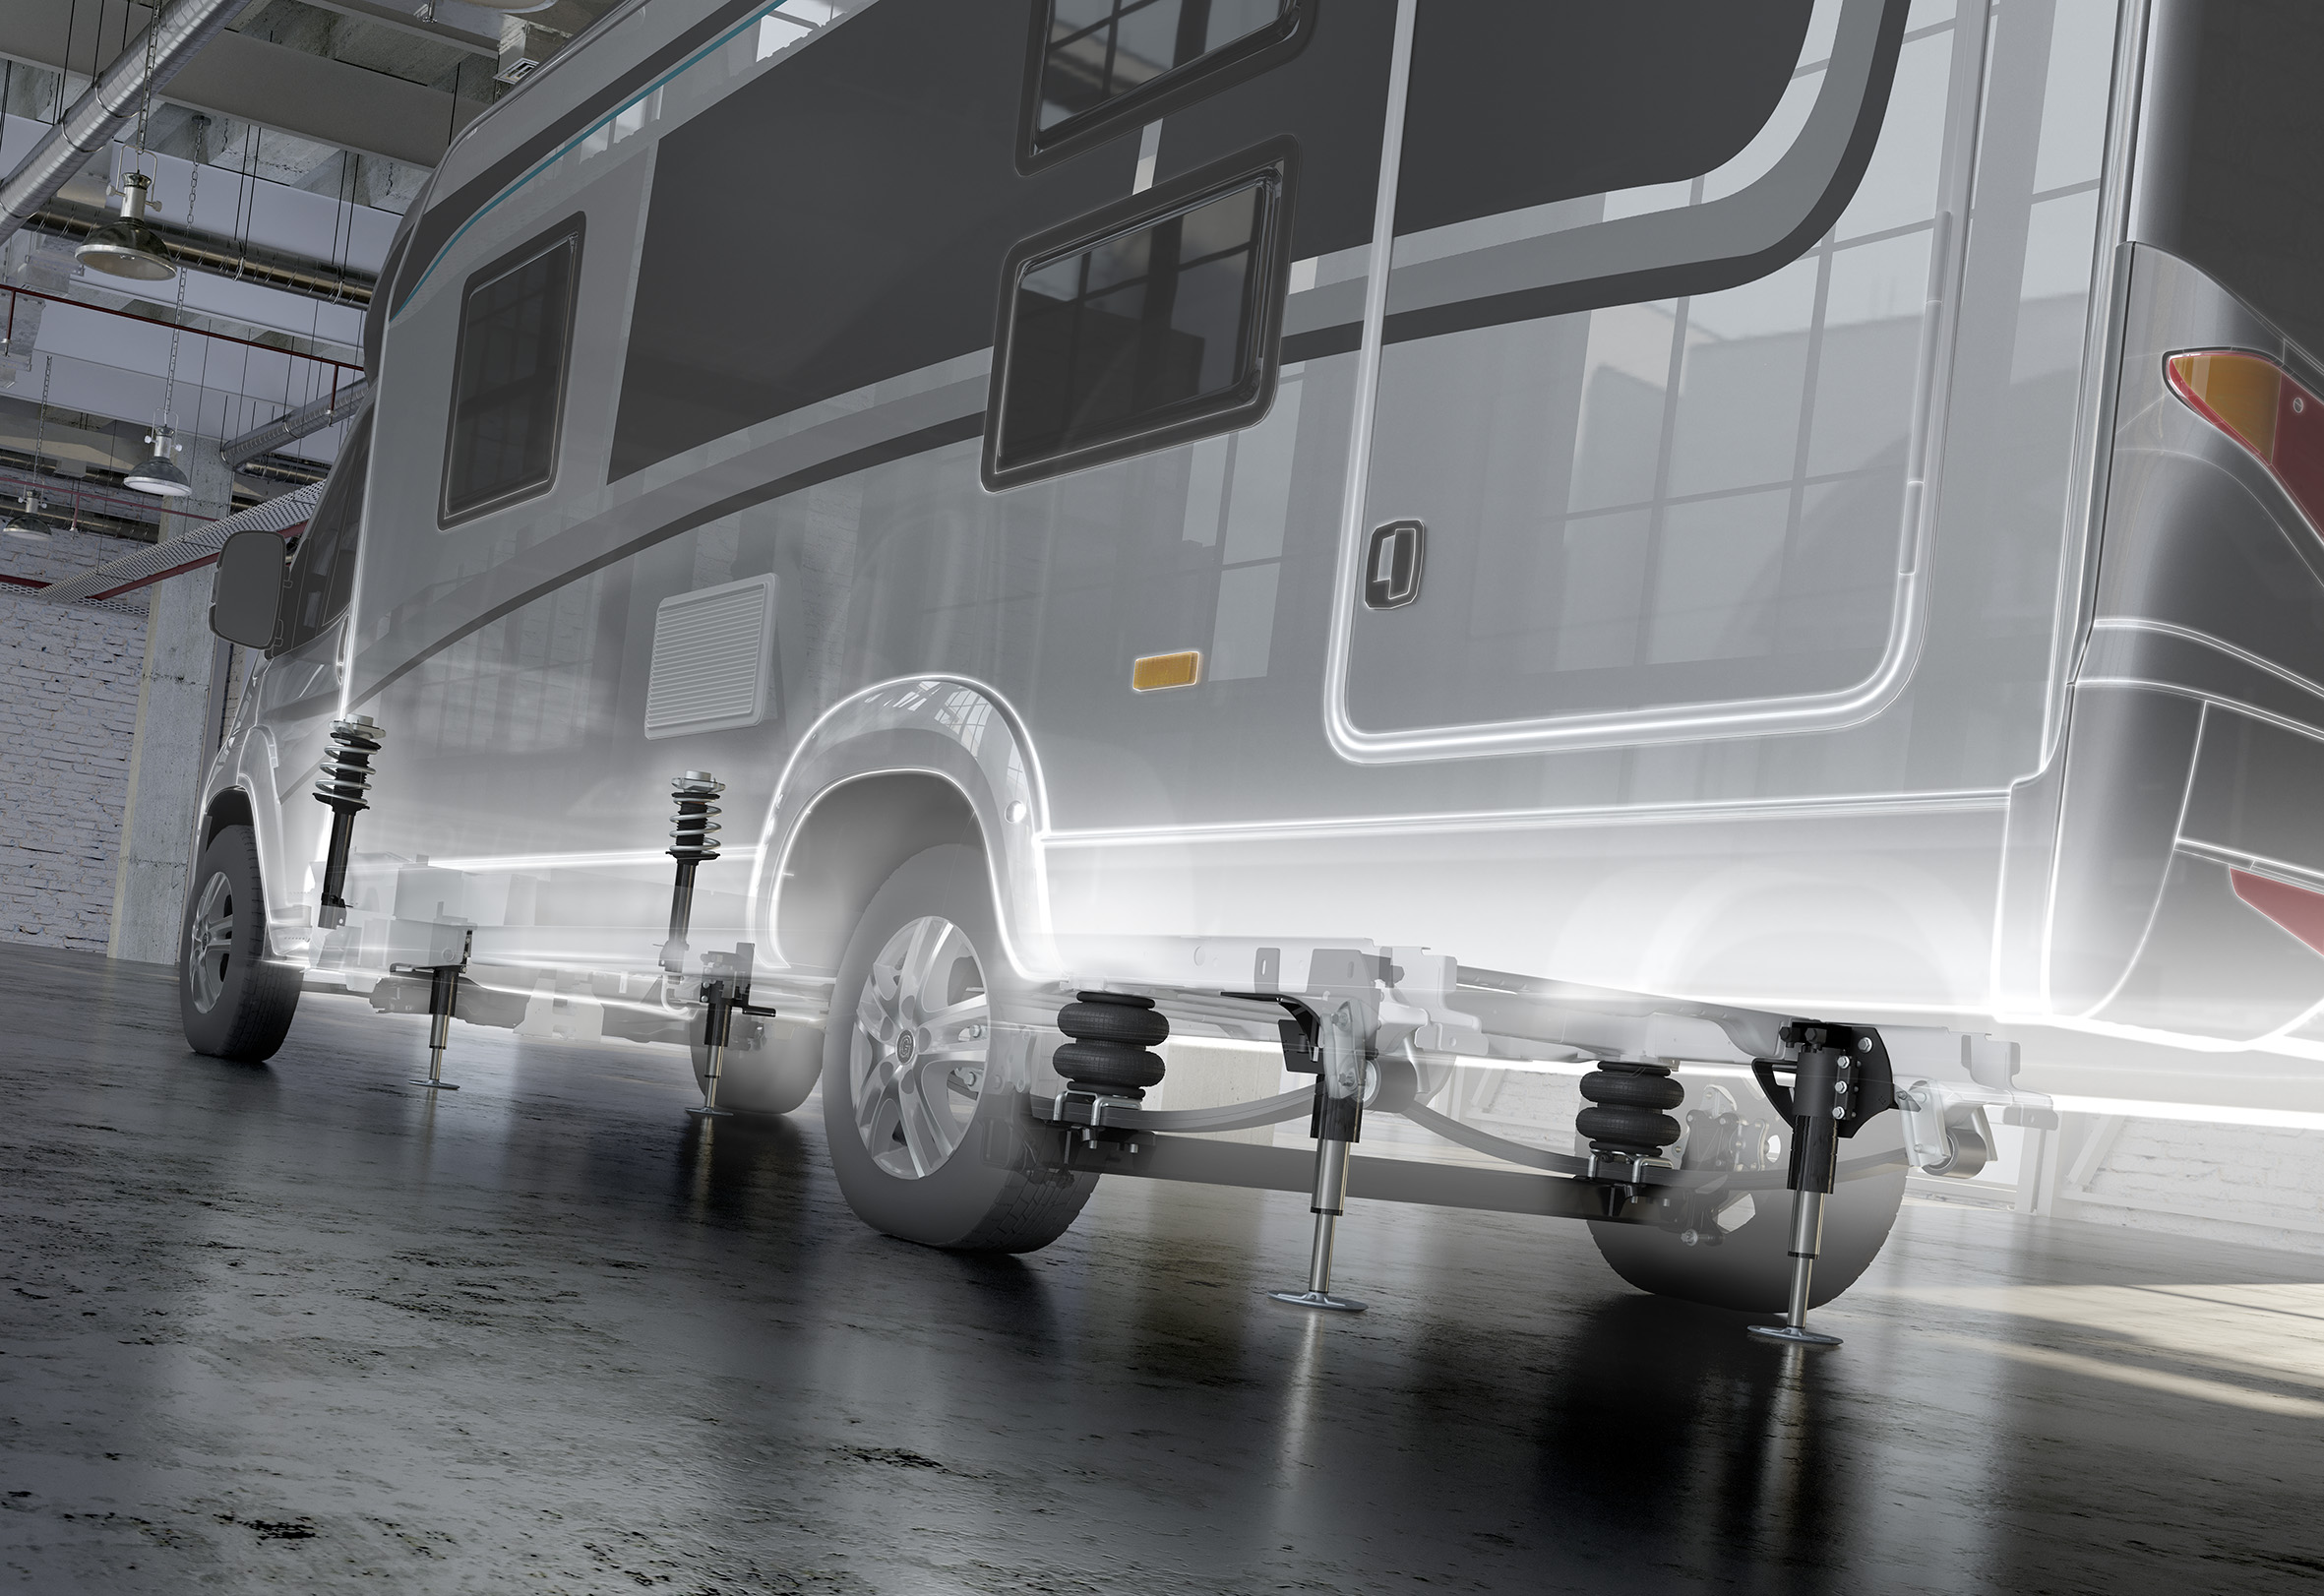 Retrofittable chassis solutions for overloaded transporter vans, commercial vehicles and special vehicles